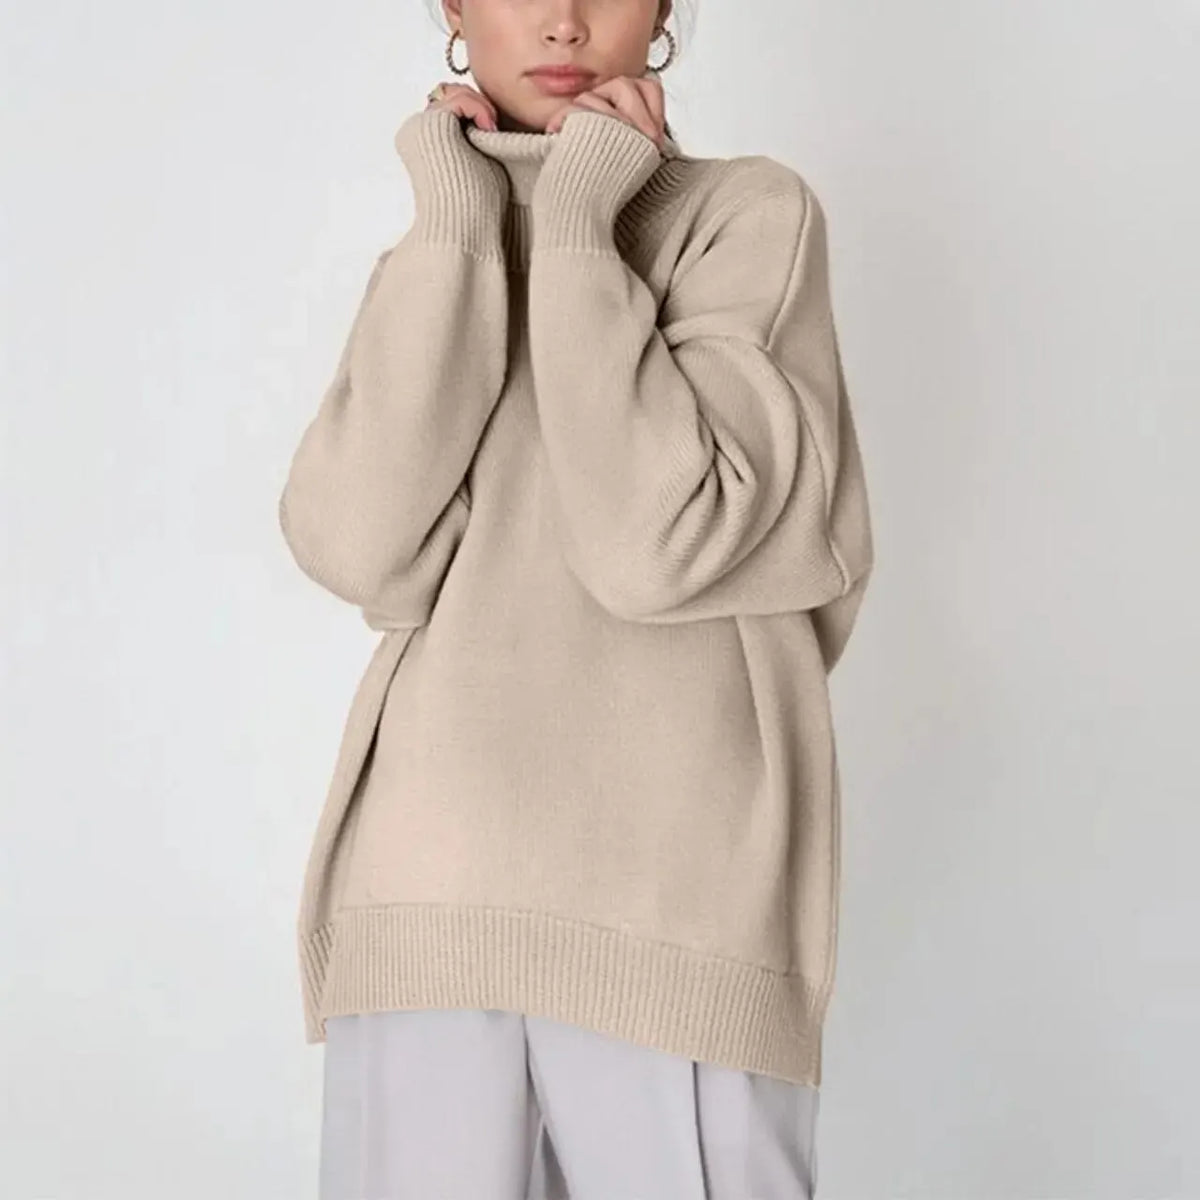 Women Sweater Turtleneck Autumn Winter Solid Elegant Thick Warm Long Sleeve Knitted Pullovers Ladies Casual Basic Jumpers Tops